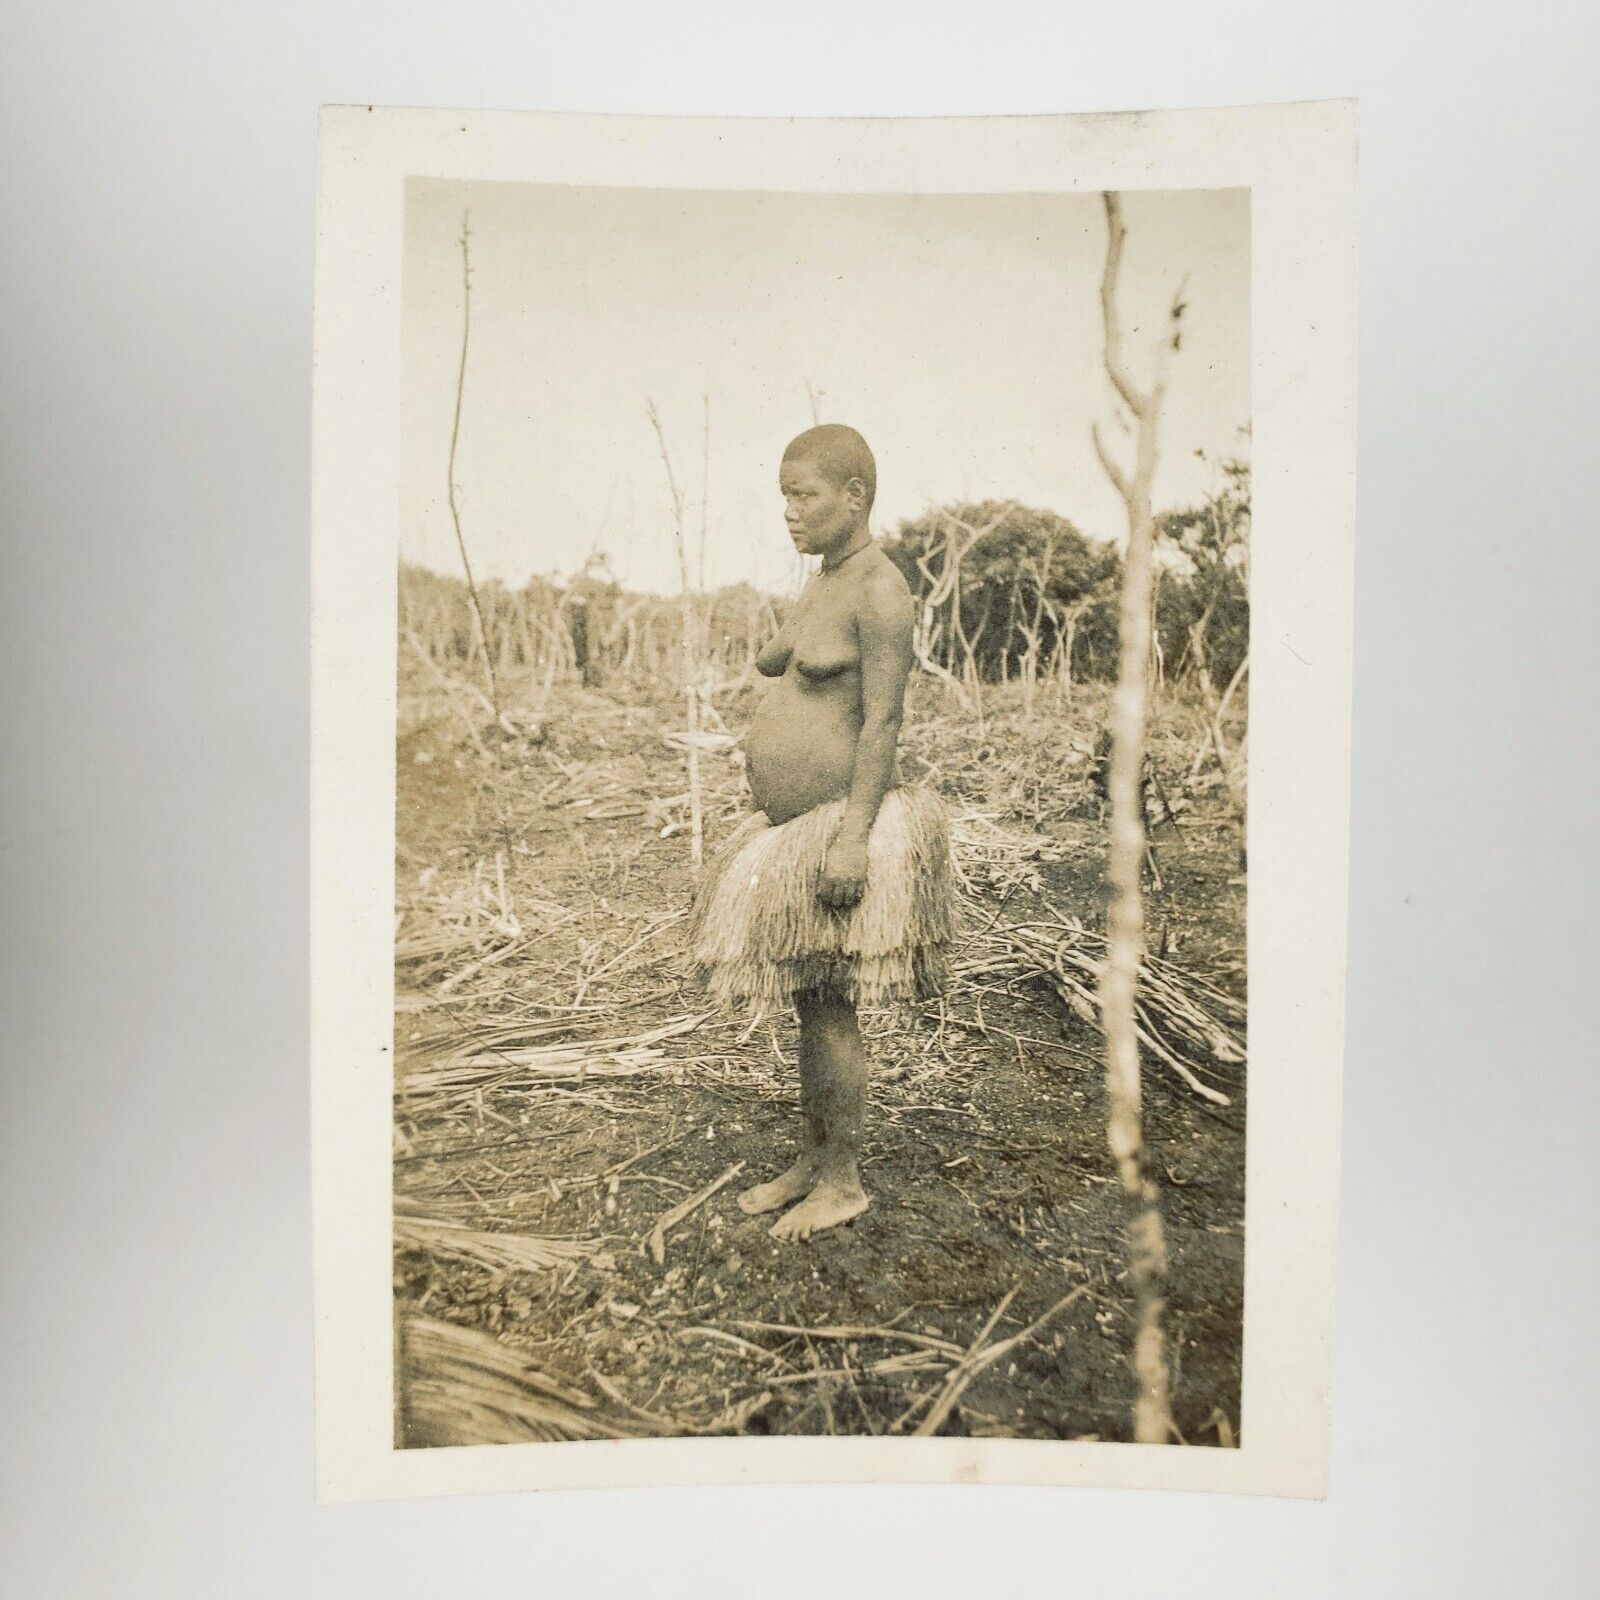 Indigenous African Tribal Woman Photo 1930s Ethnographic Study Snapshot H978